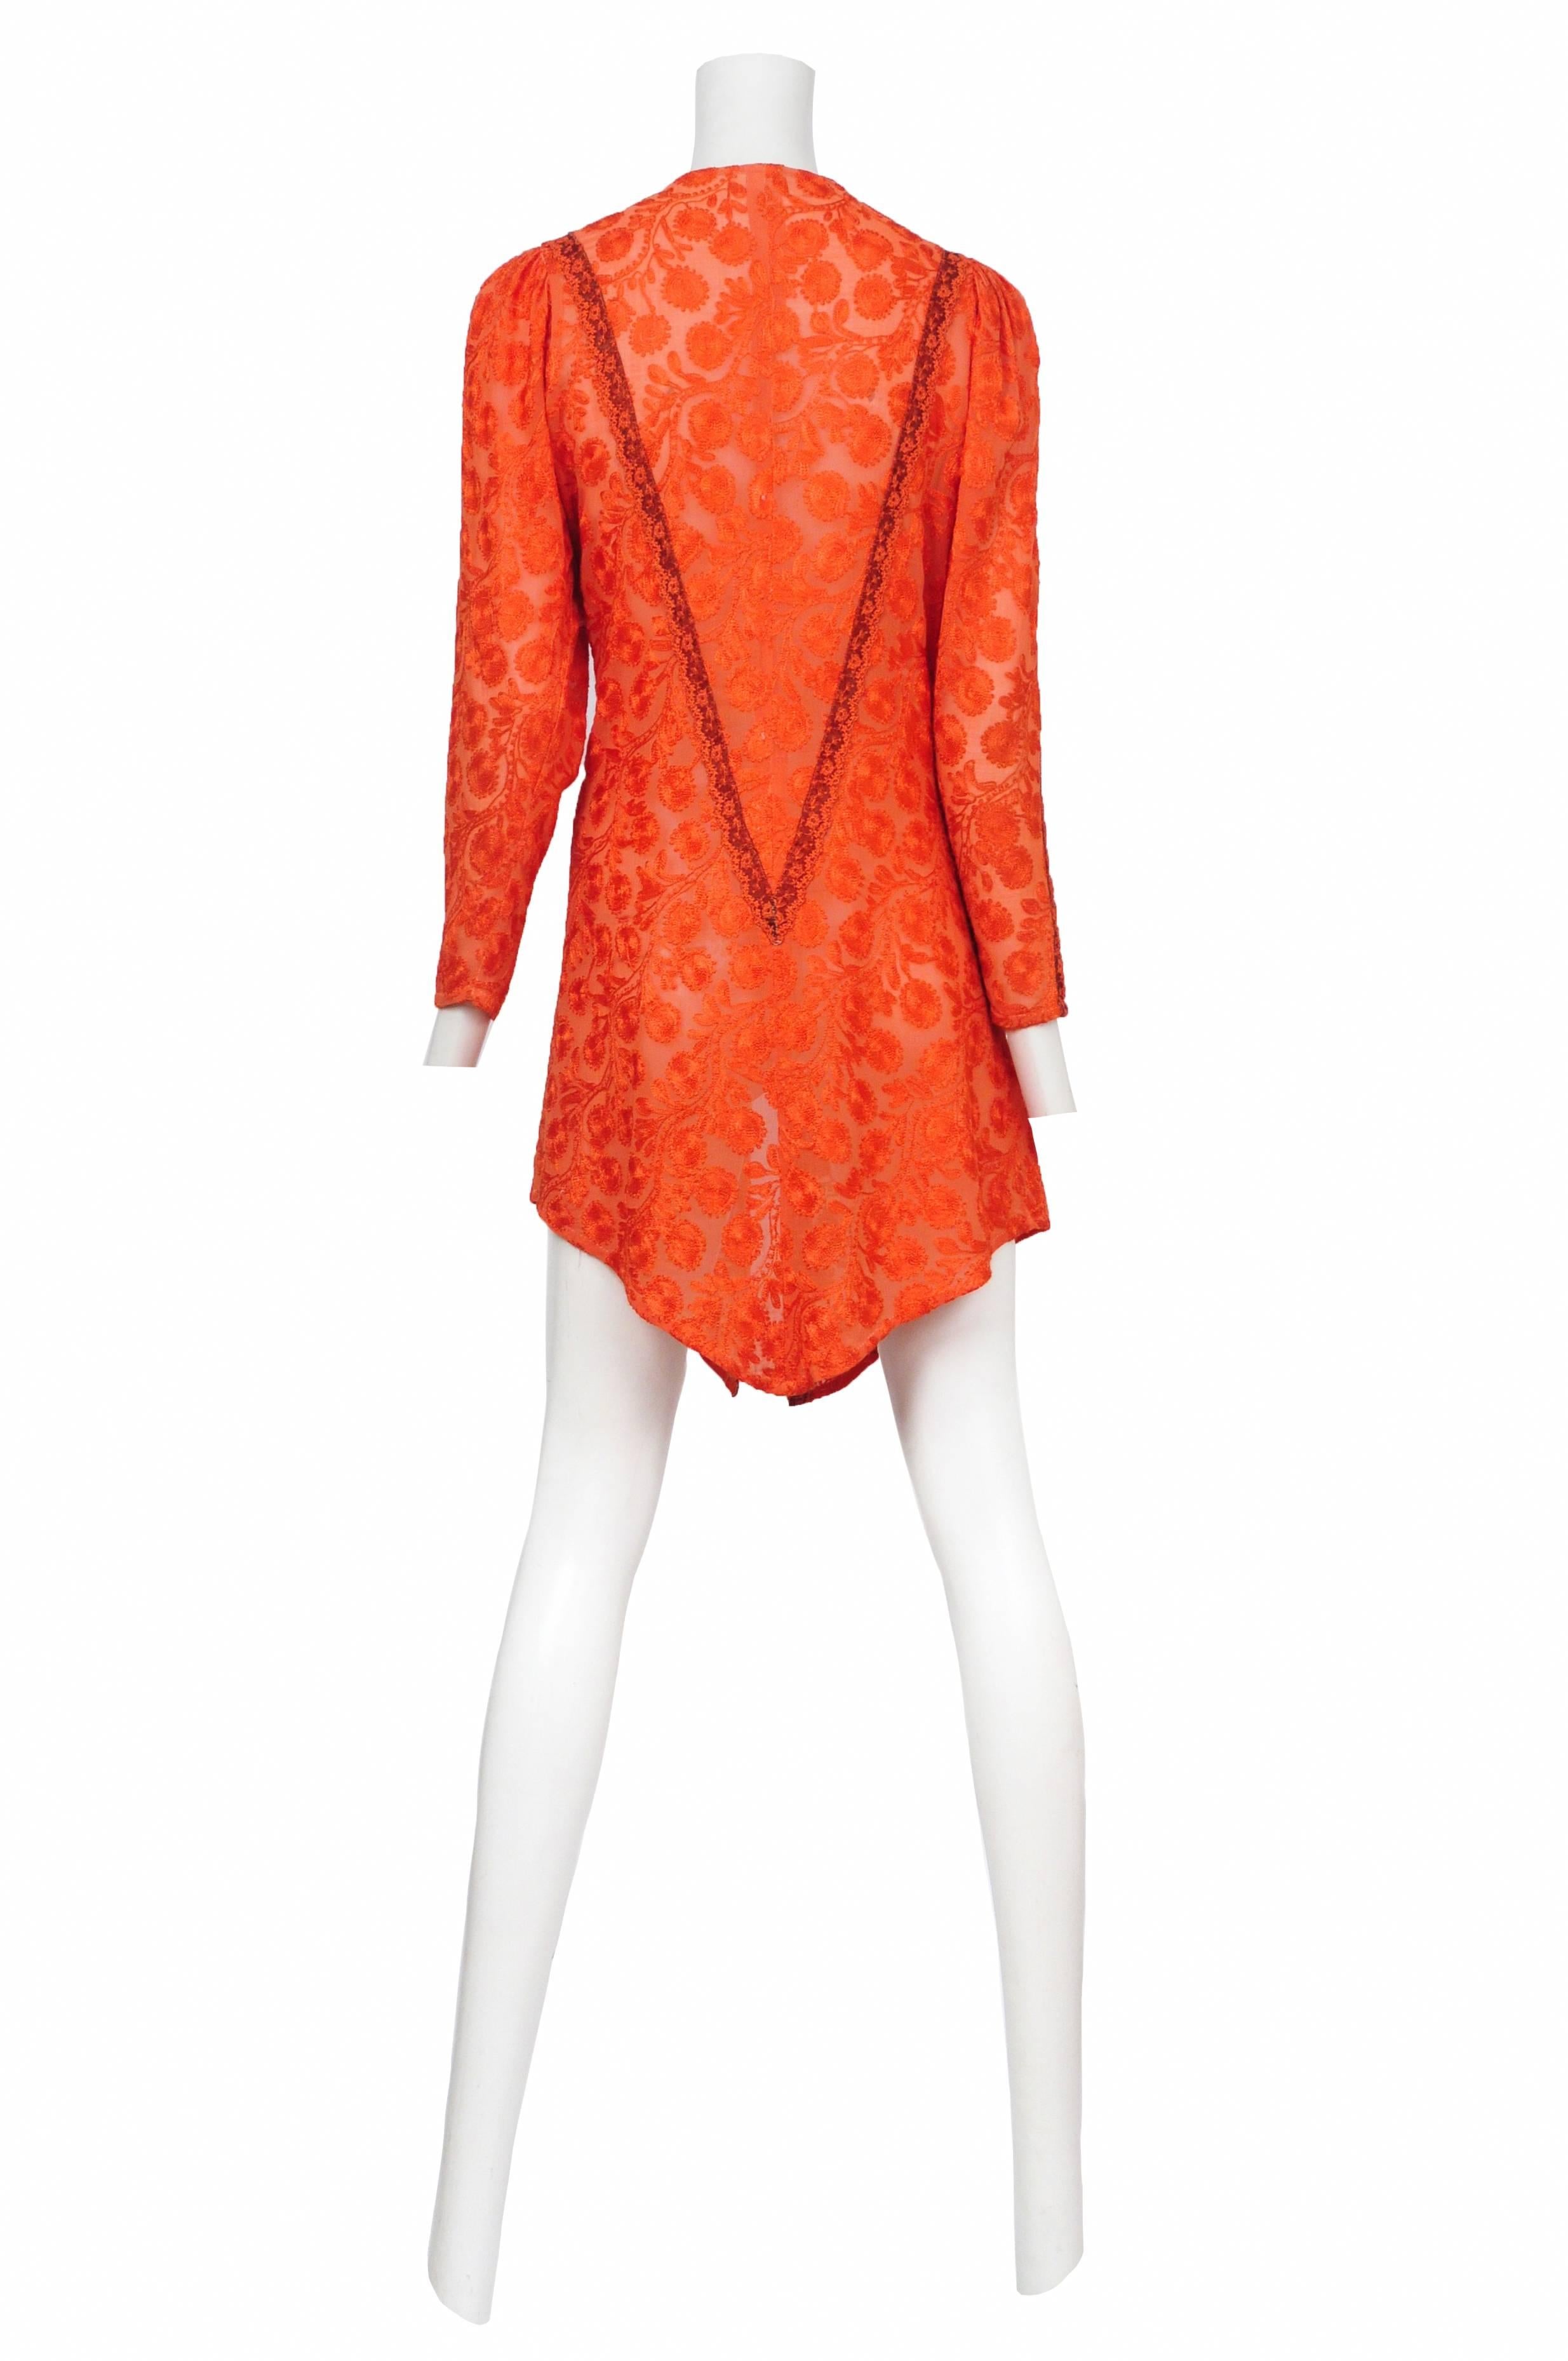 Vintage Thea Porter tonal orange embroidered tunic, featuring a bias cut hem and 3/4 length sleeves. 